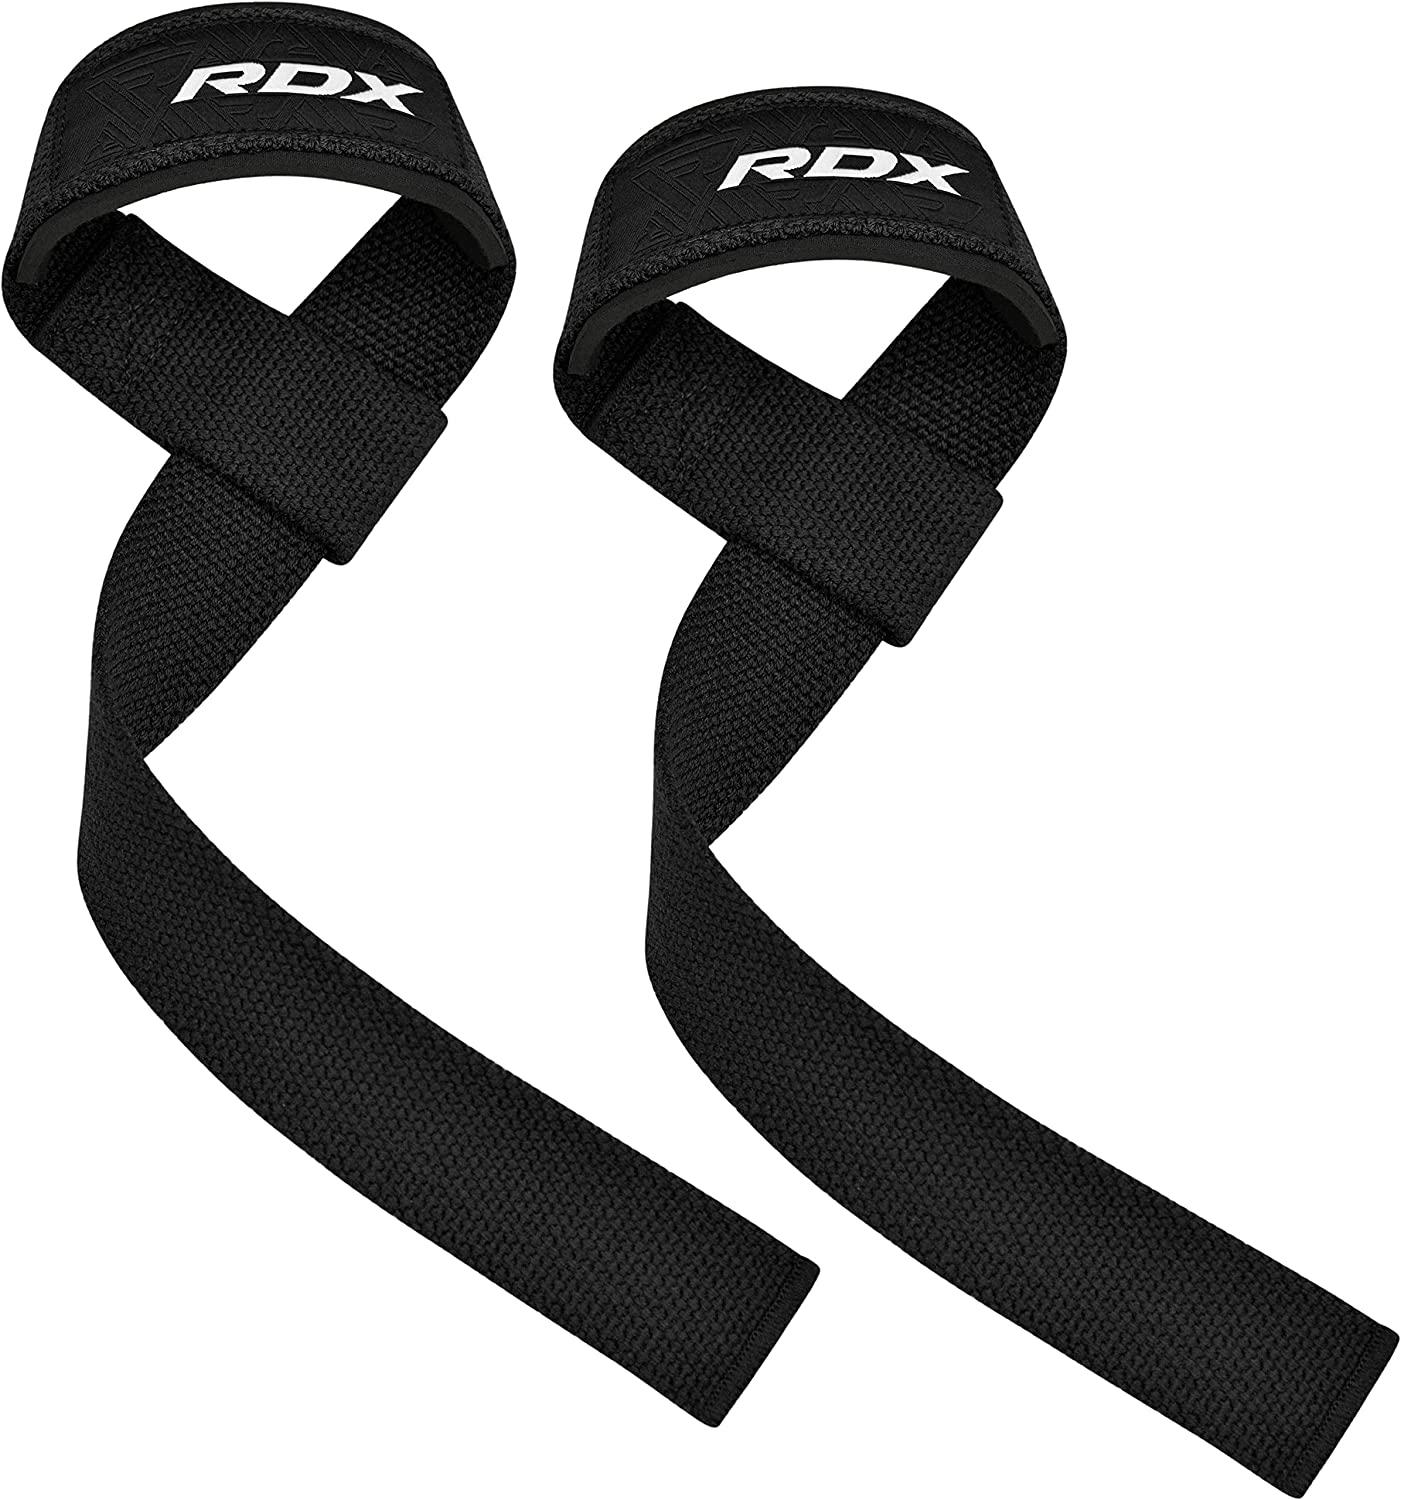 OHMY FIT Padded Cotton Power Lifting Straps for Weightlifting, Deadlifting,  Powerlifting, and Strength Training. Strong Wrist Straps for Men and Women.  